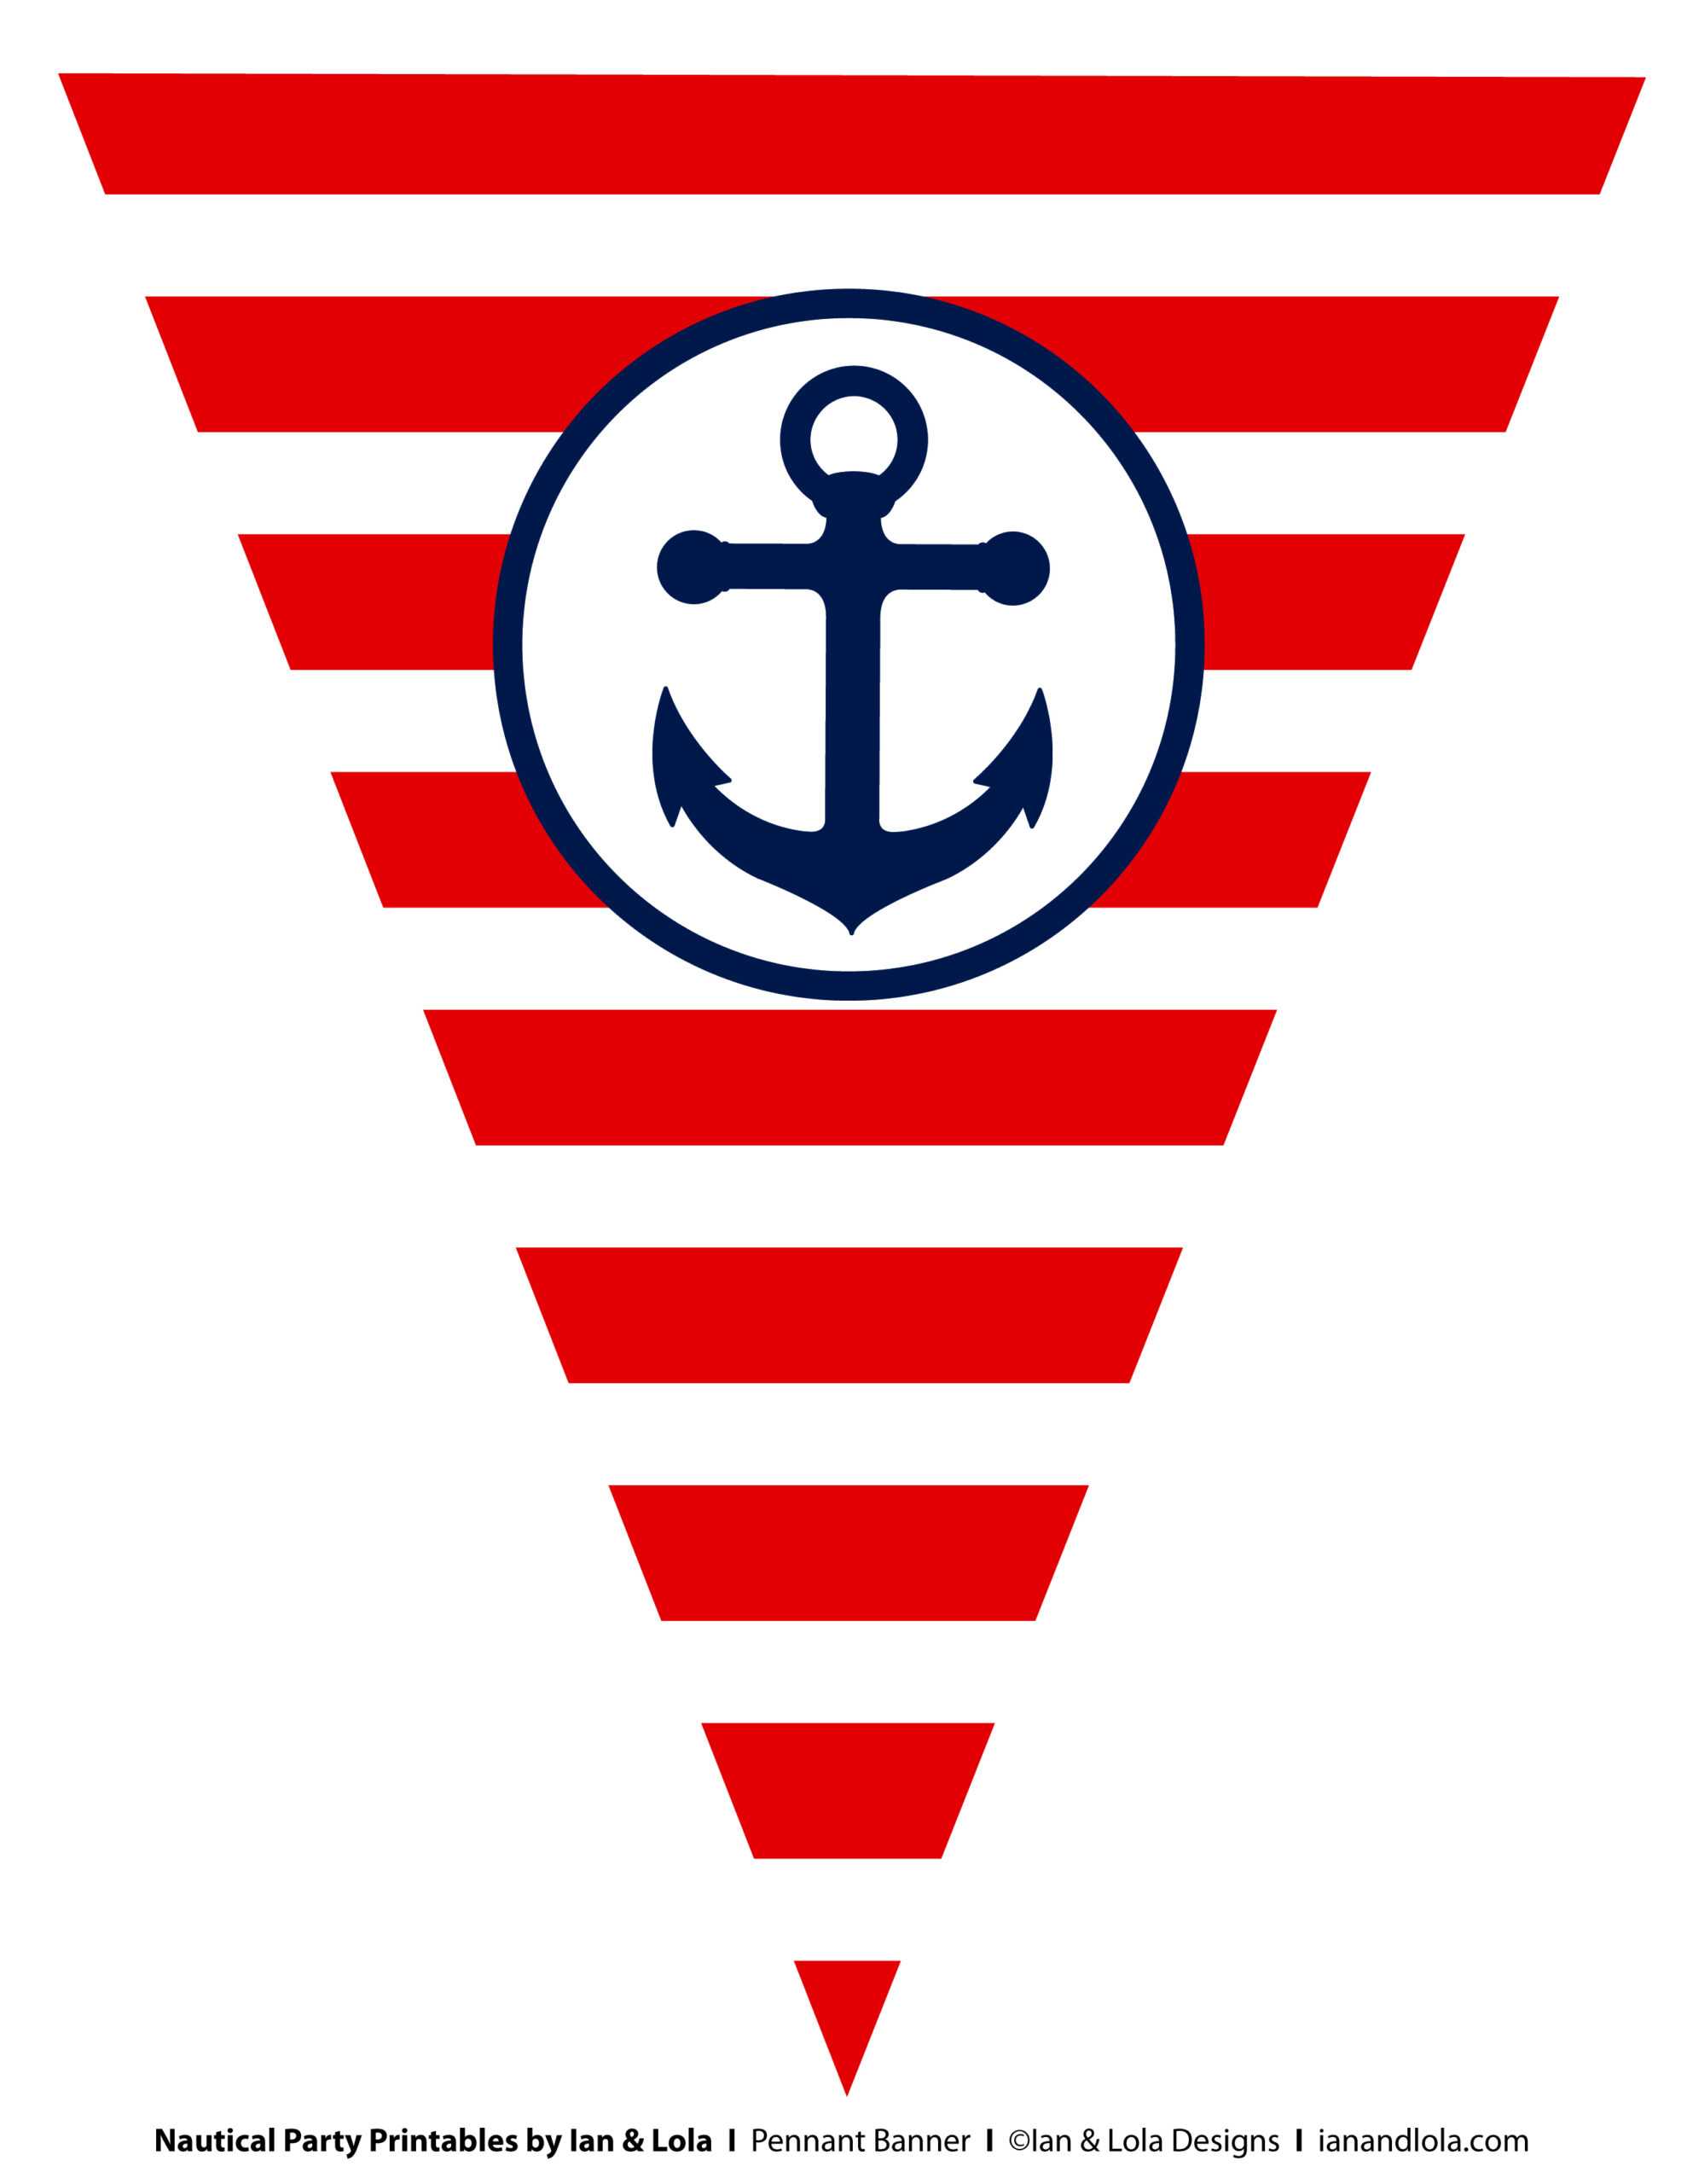 Free Nautical Party Printables From Ian & Lola Designs Intended For Nautical Banner Template